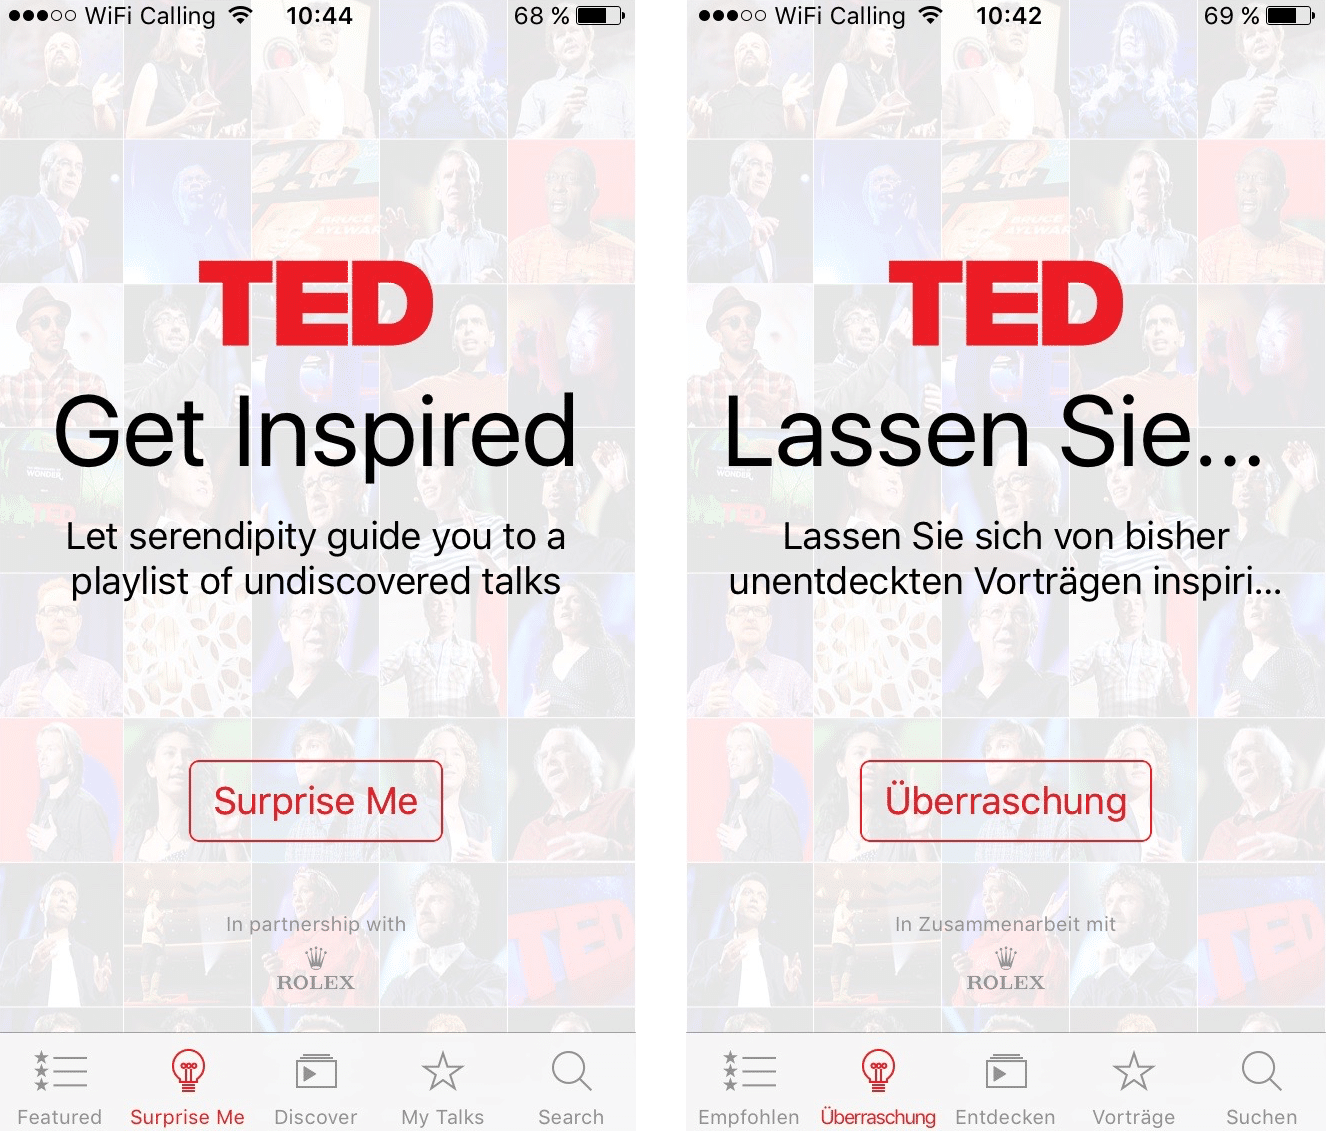 Ted app localisation for German with text expansion